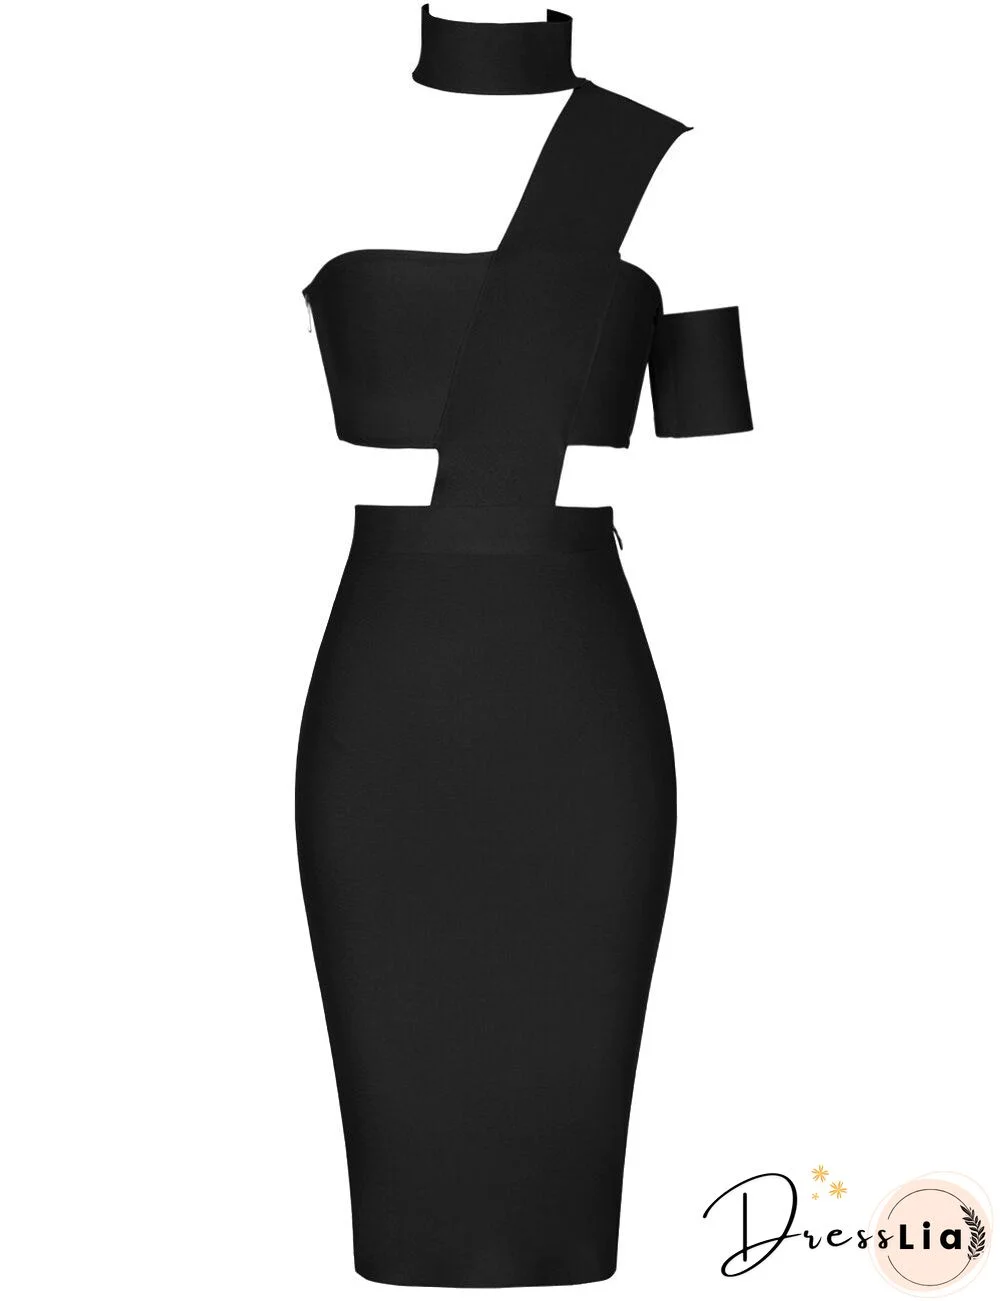 Ocstrade Bandage Dress New Arrival Summer Green Bandage Dress Bodycon Women Black Cut Out Sexy Party Dress Club Outfits